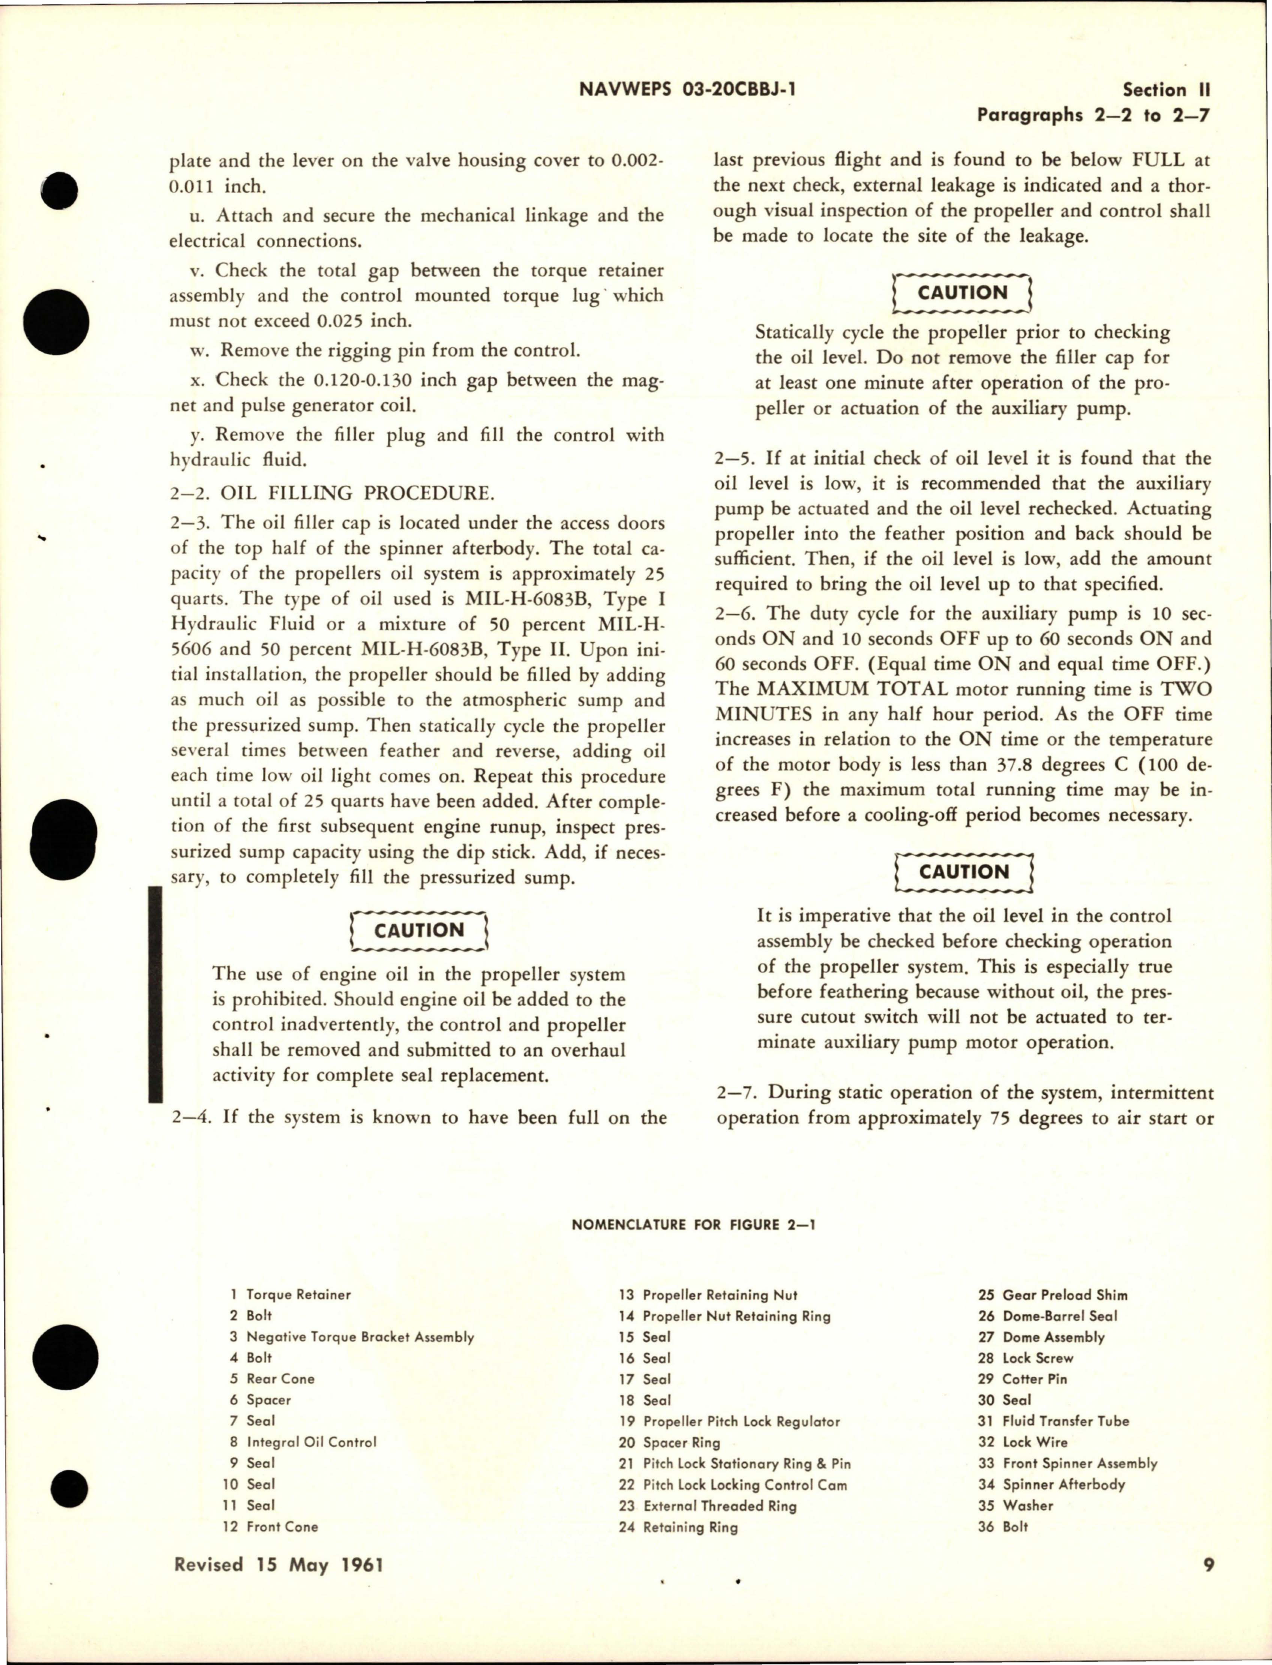 Sample page 5 from AirCorps Library document: Operation and Maintenance Instructions for Variable Pitch Propeller - Models 54H60-69, 54H60-75, and 54H60-73